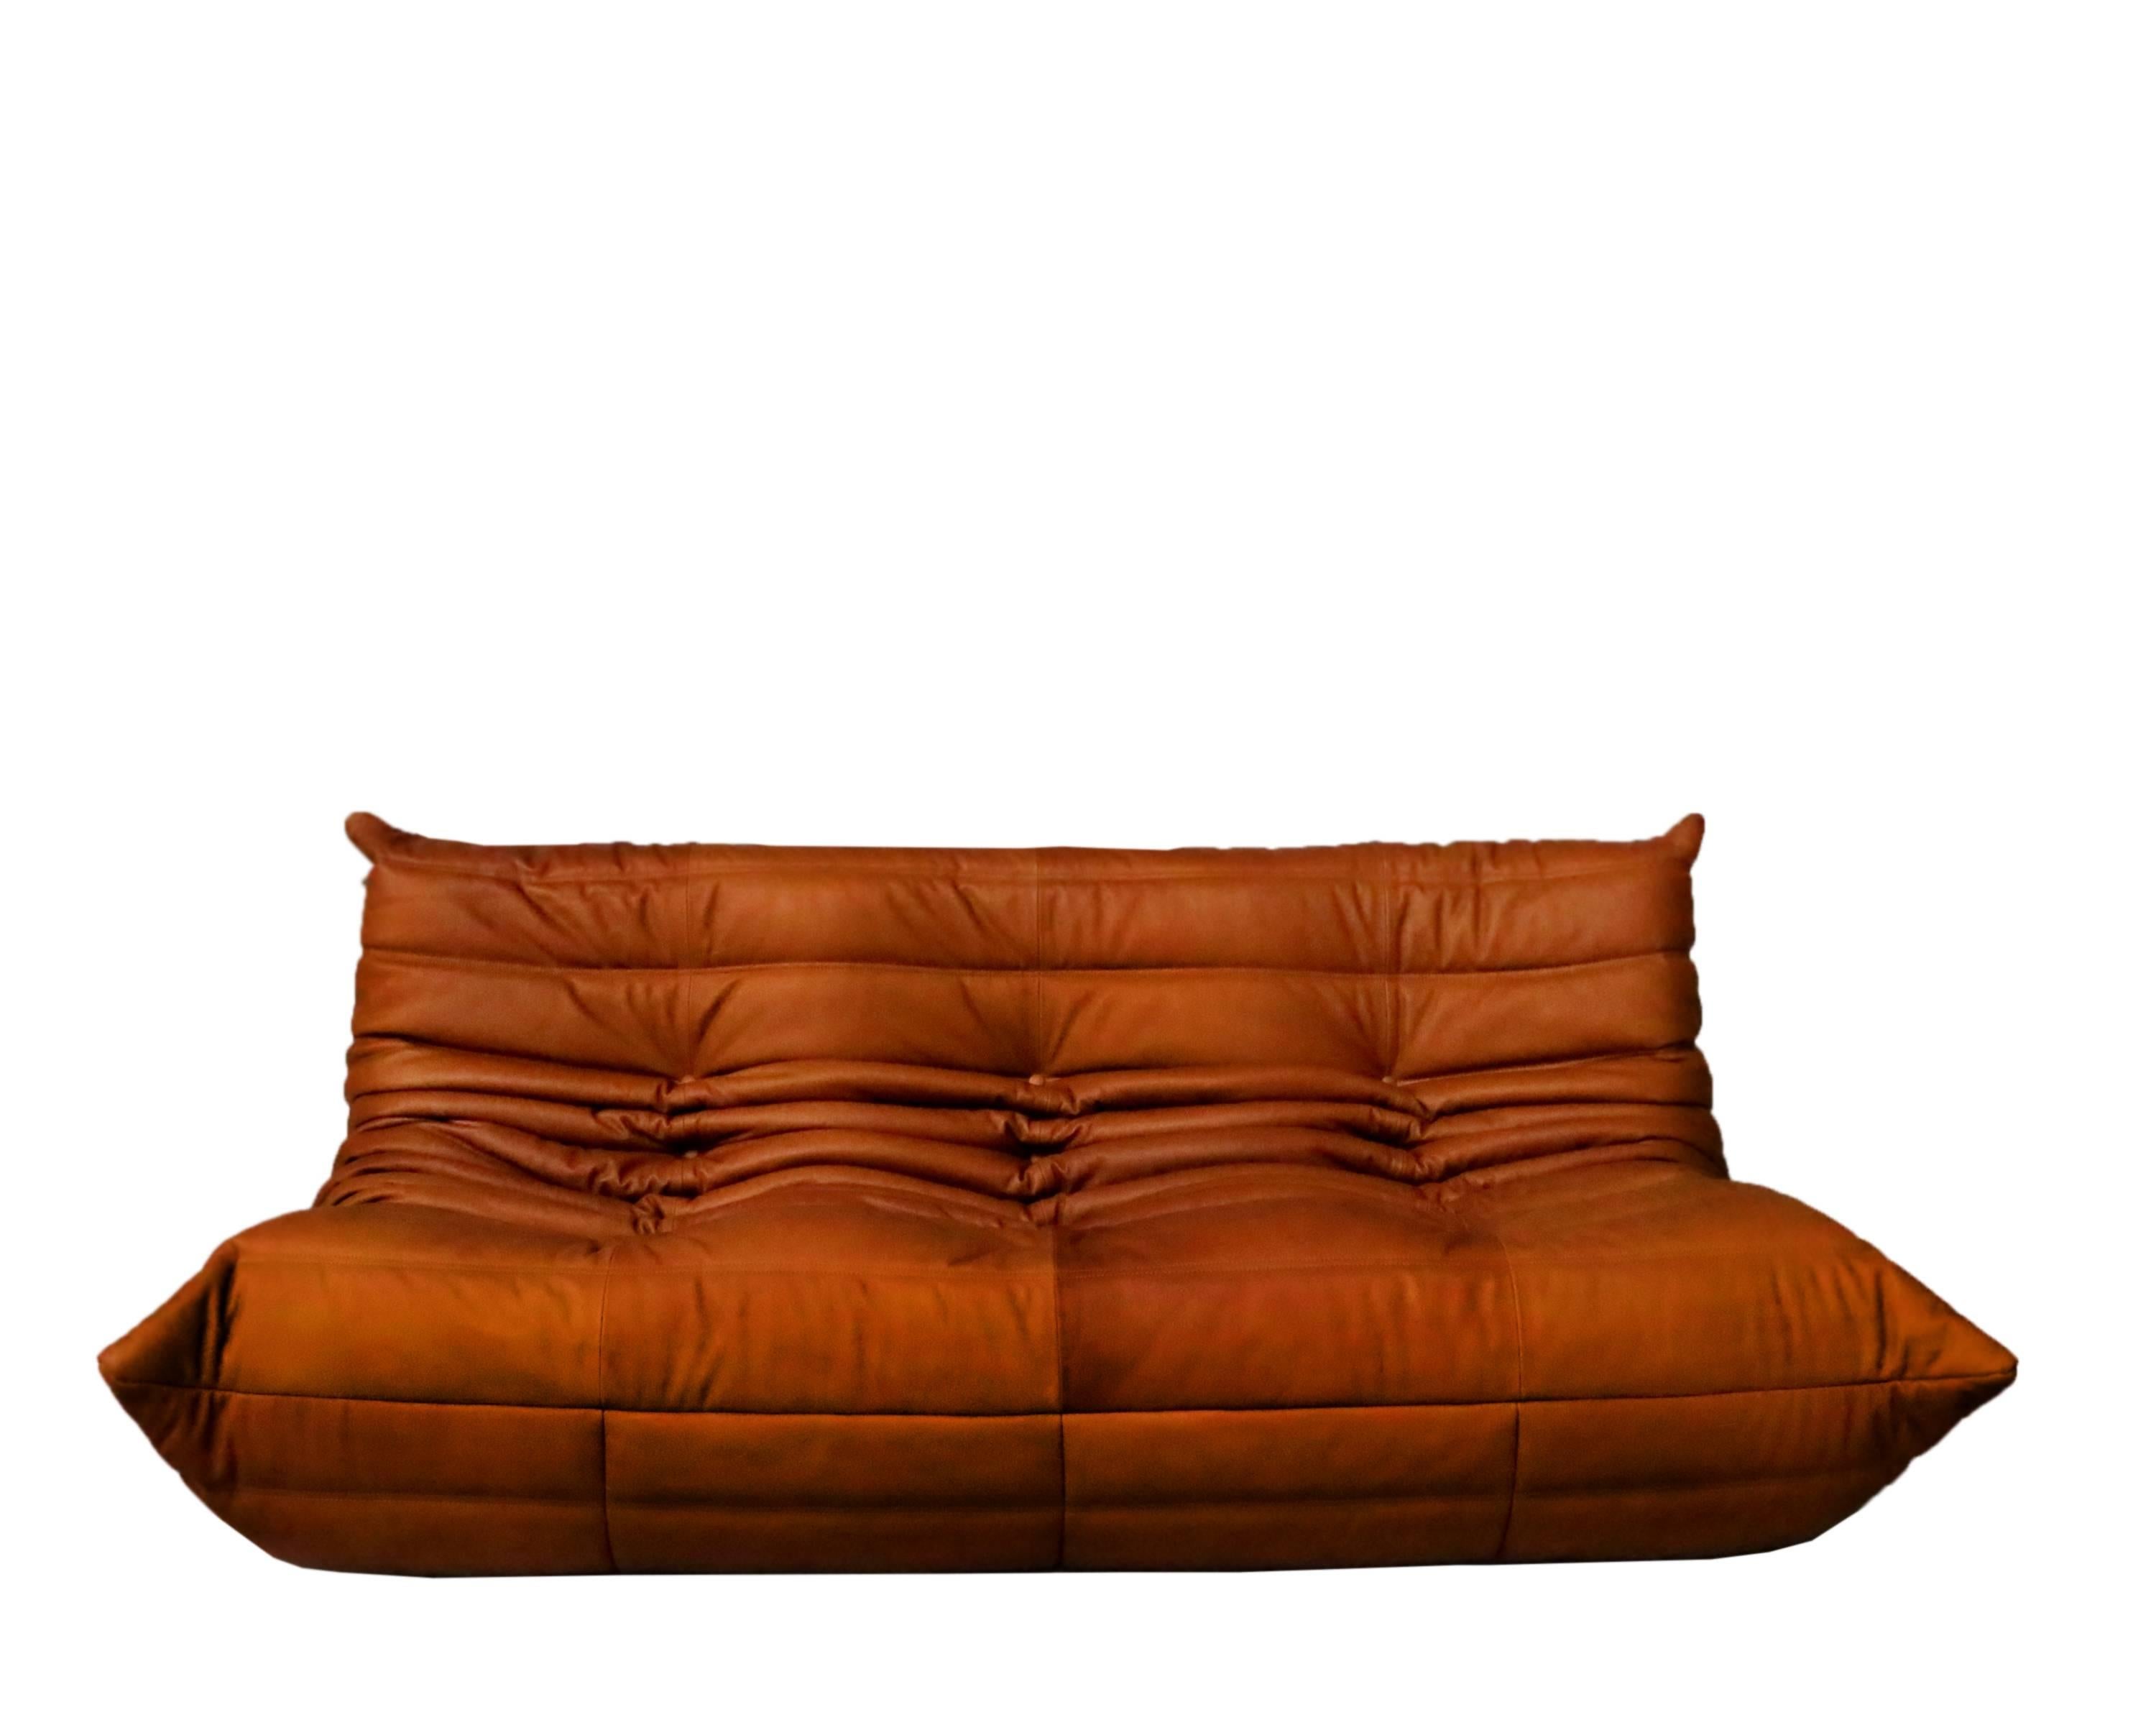 Order for Cognac Upholstered Set, including:
1 Three Seater
1 Two Seater
1 Single Seater
1 Pouf
2 Corner Pieces

Iconic French sofa set. Wonderful full grain cognac leather edition.
We only use our signature vintage Cognac or black high